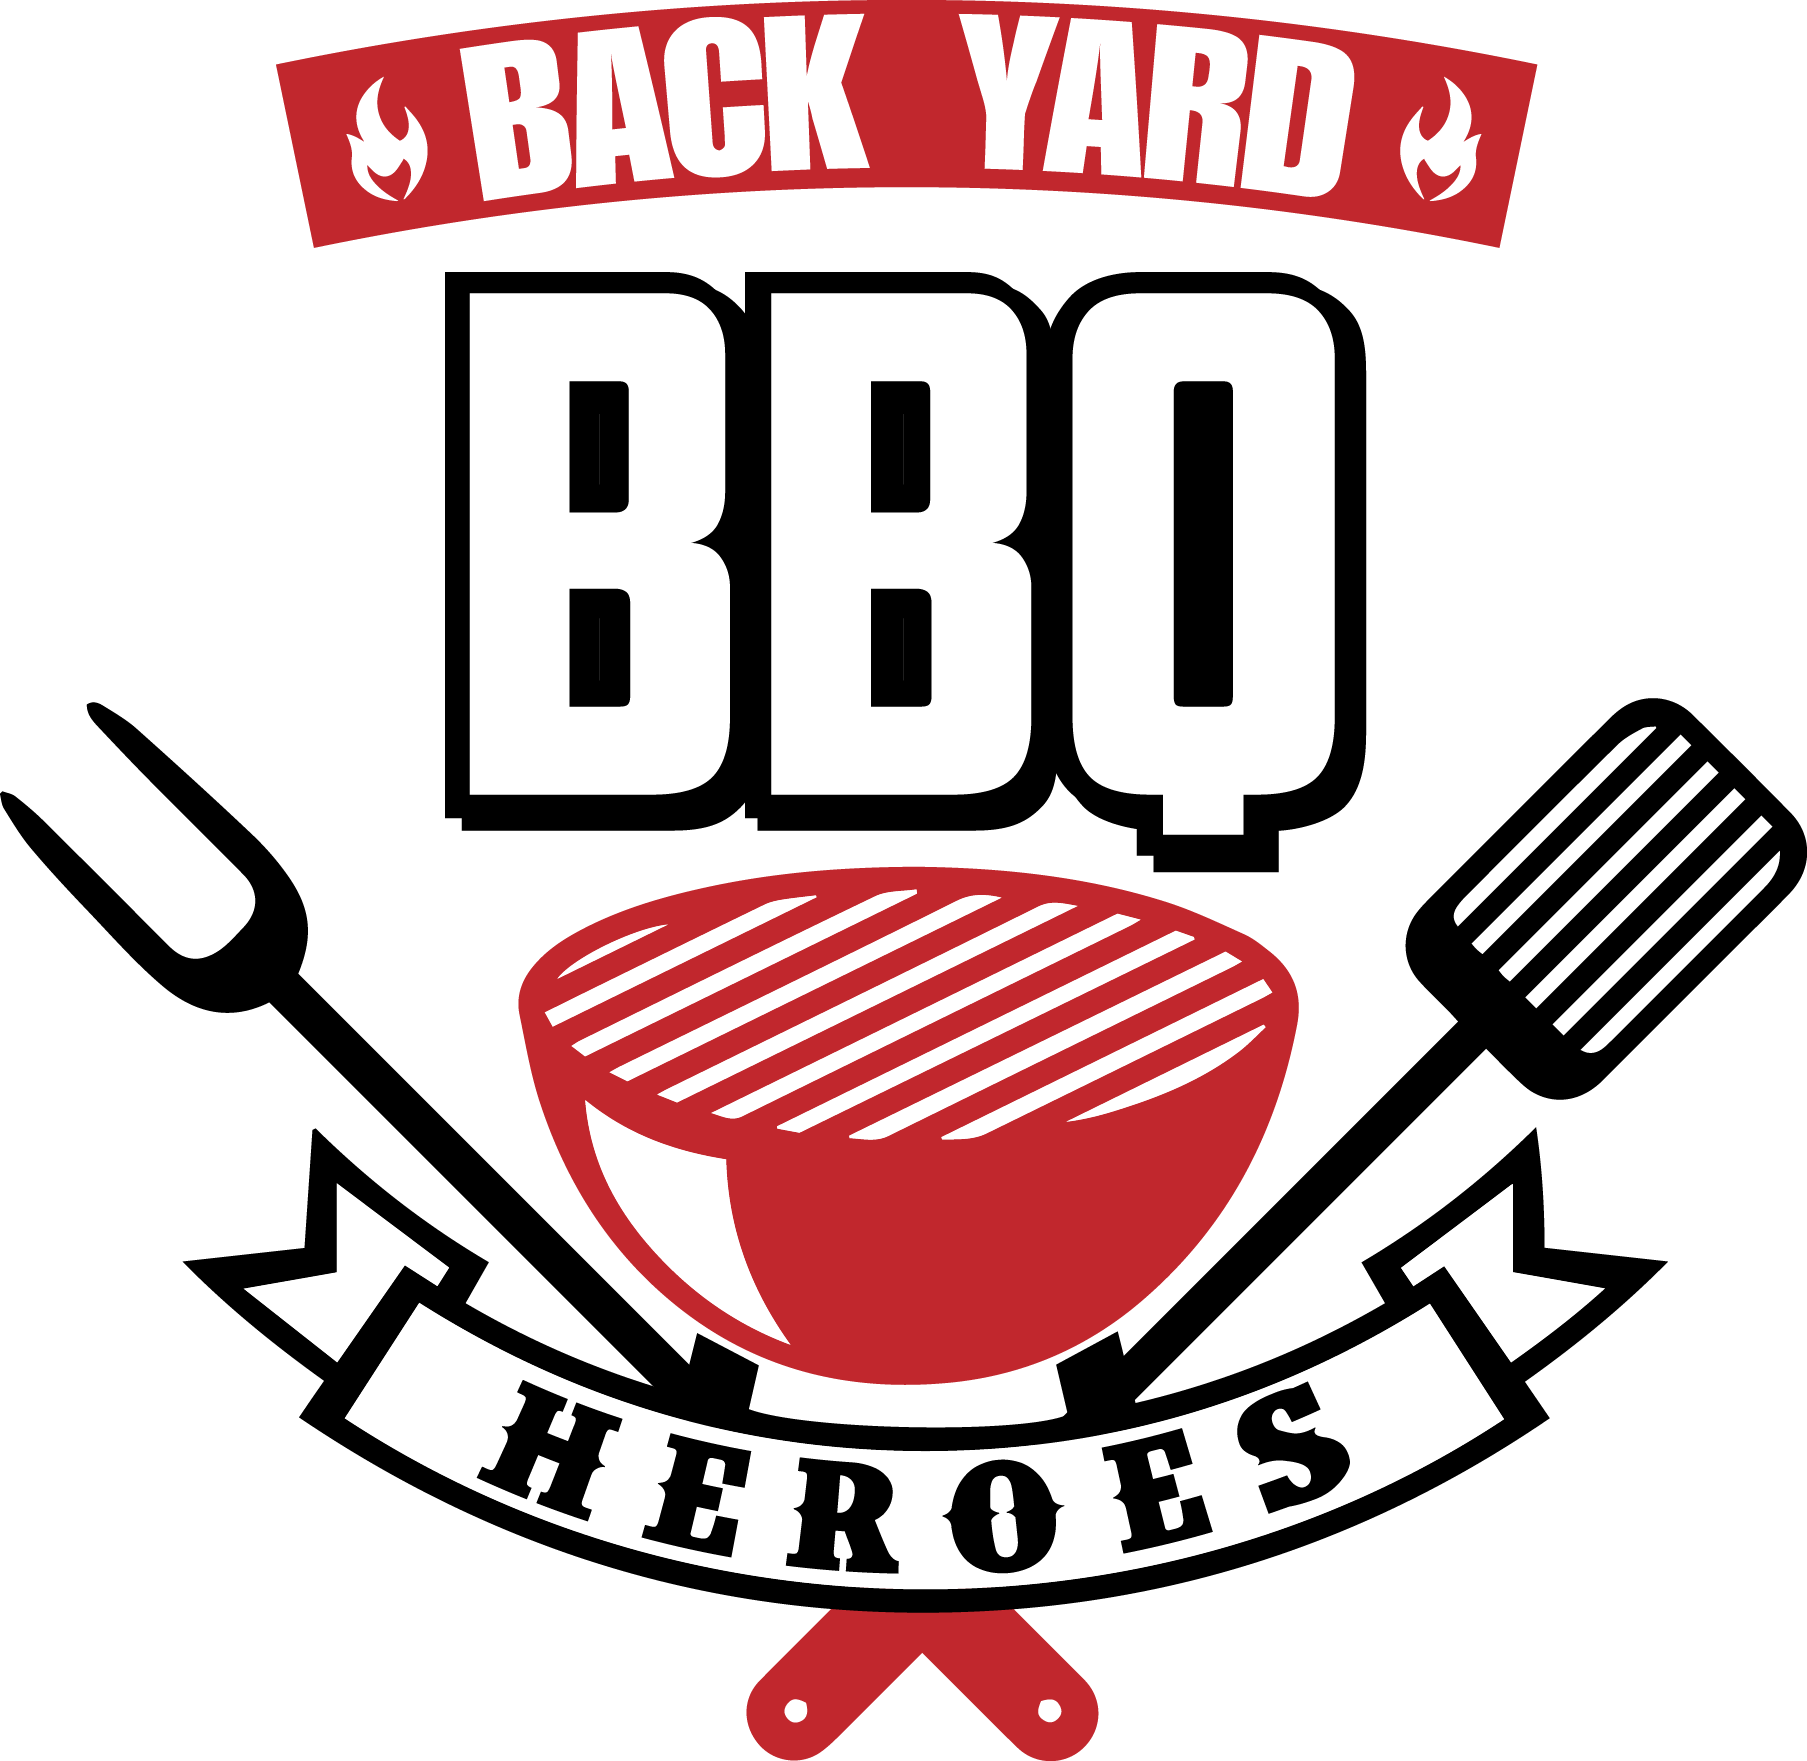 Back yard heroes become. Grill clipart southern bbq